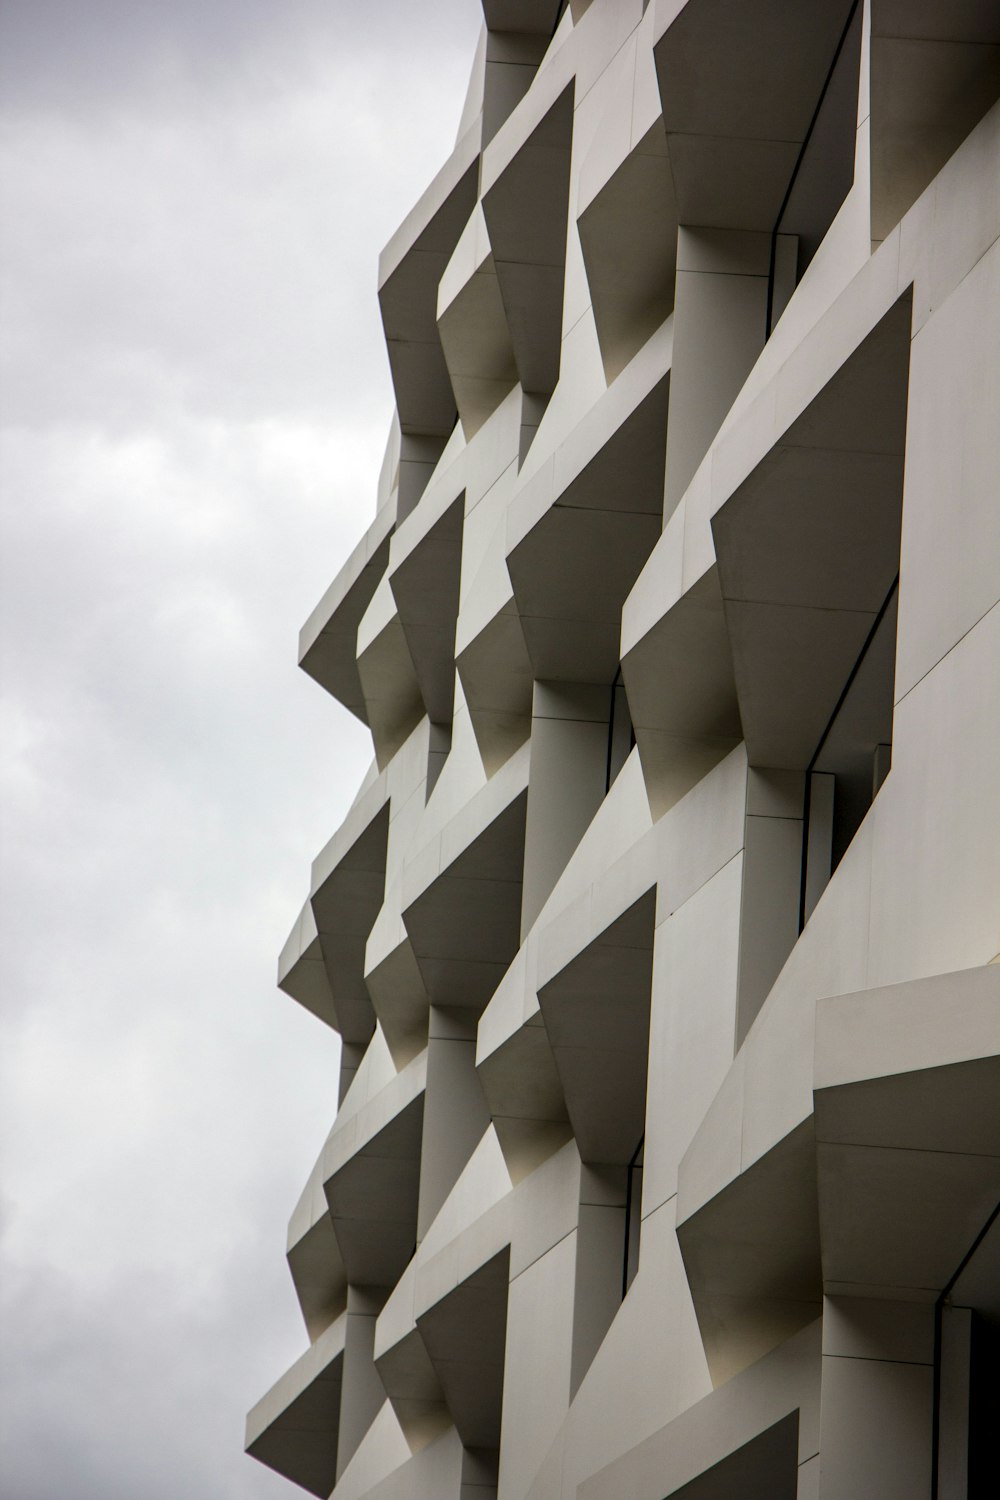 a close up of the side of a building